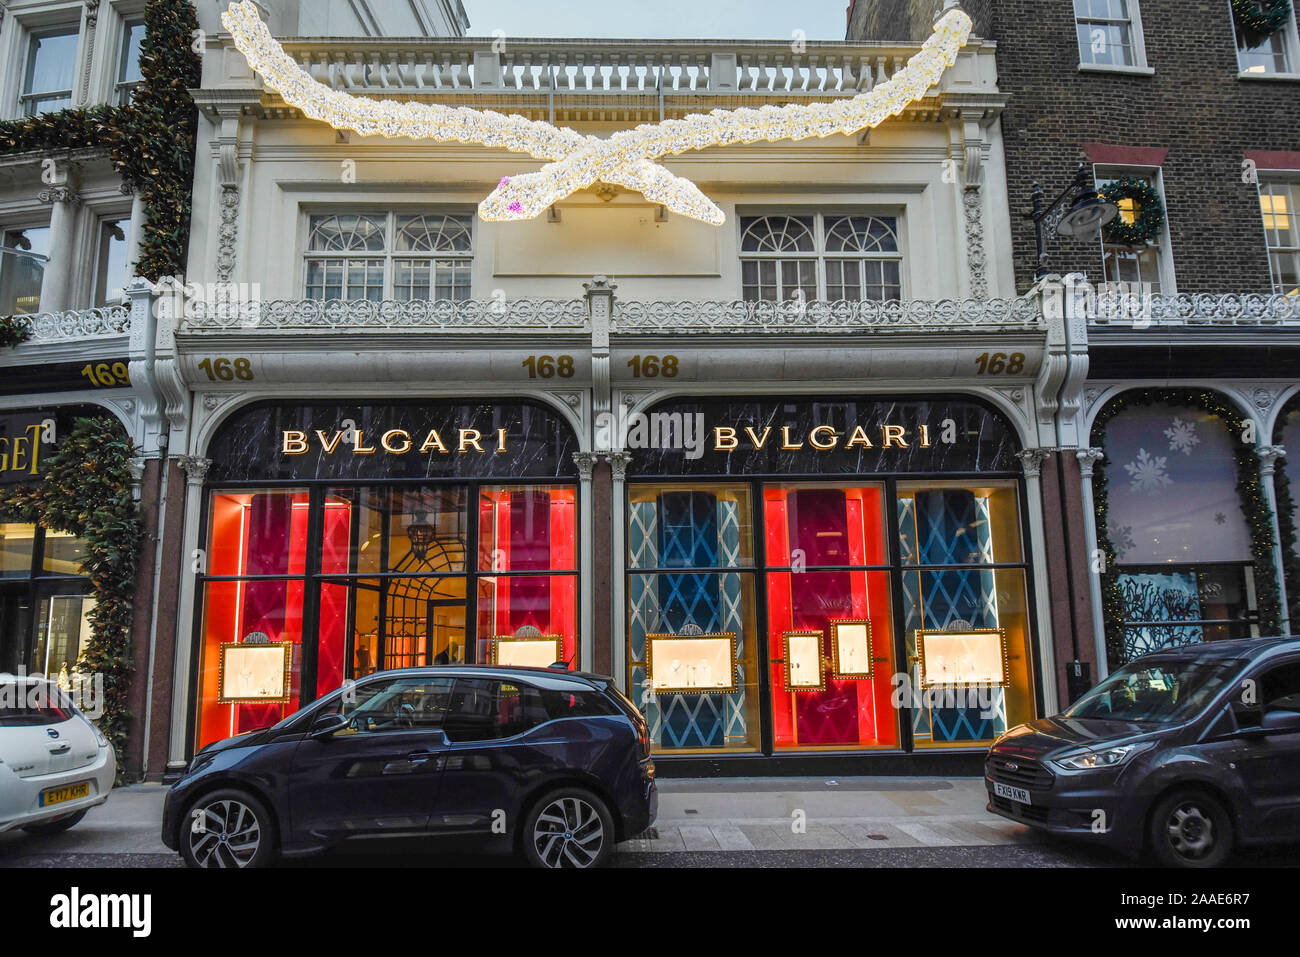 London, UK.  21 November 2019.  Christmas decorations on the exterior of the Bulgari store in Mayfair.  Retailers continue to battle against losing custom to online sales, but high-end, luxury stores offer a shopping experience to wealthy buyers visiting from overseas. Bulgari owner LVMH, the company owned by the family of Europe's wealthiest man Bernard Arnault, is currently bidding to buy Tiffany & Co. for US$16bn.   Credit: Stephen Chung / Alamy Live News Stock Photo